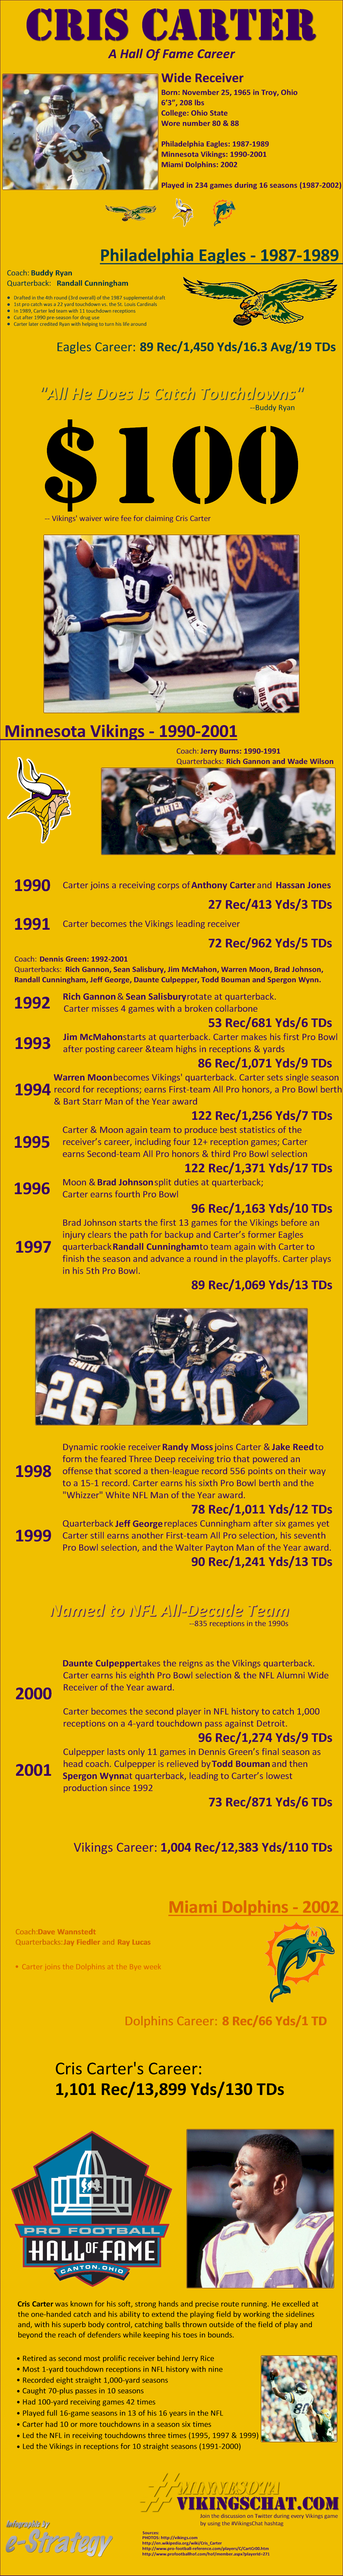 Infographic - Cris Carter's Hall Of Fame Career